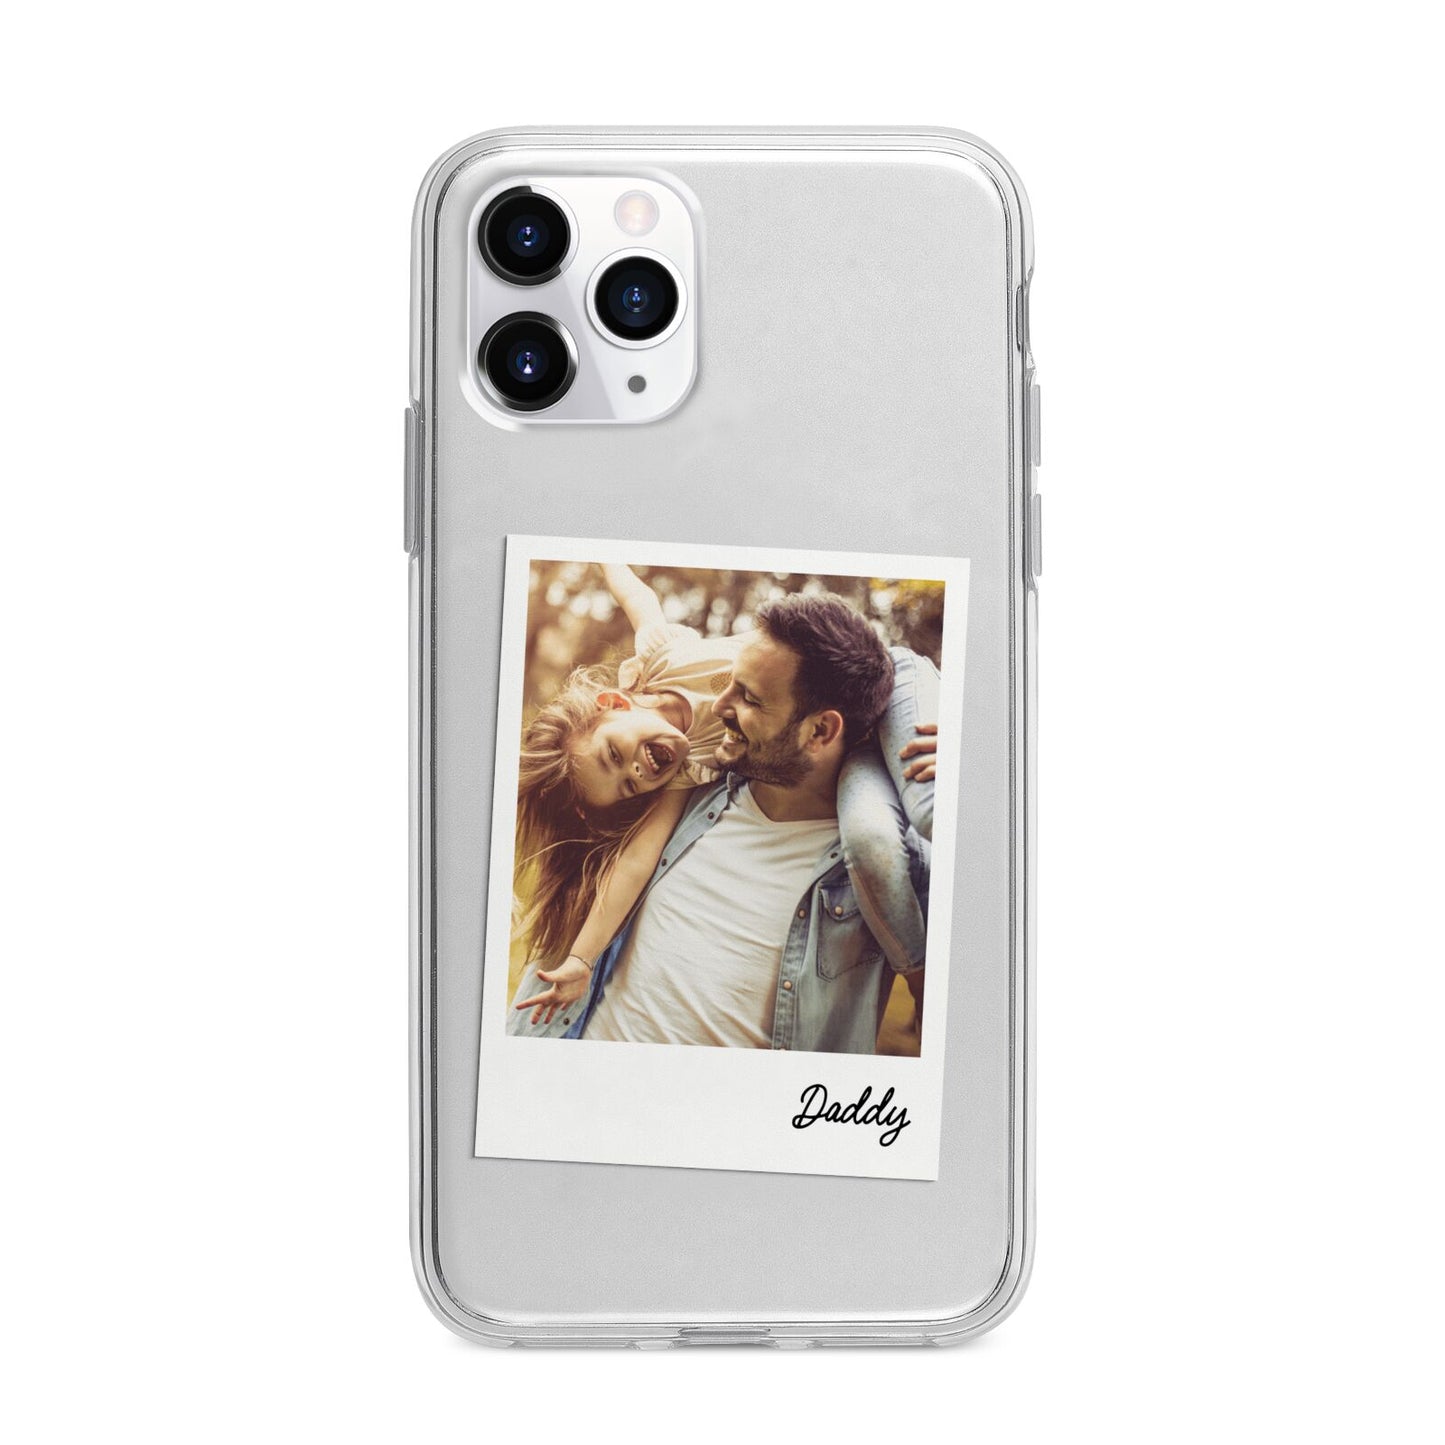 Fathers Day Photo Apple iPhone 11 Pro Max in Silver with Bumper Case